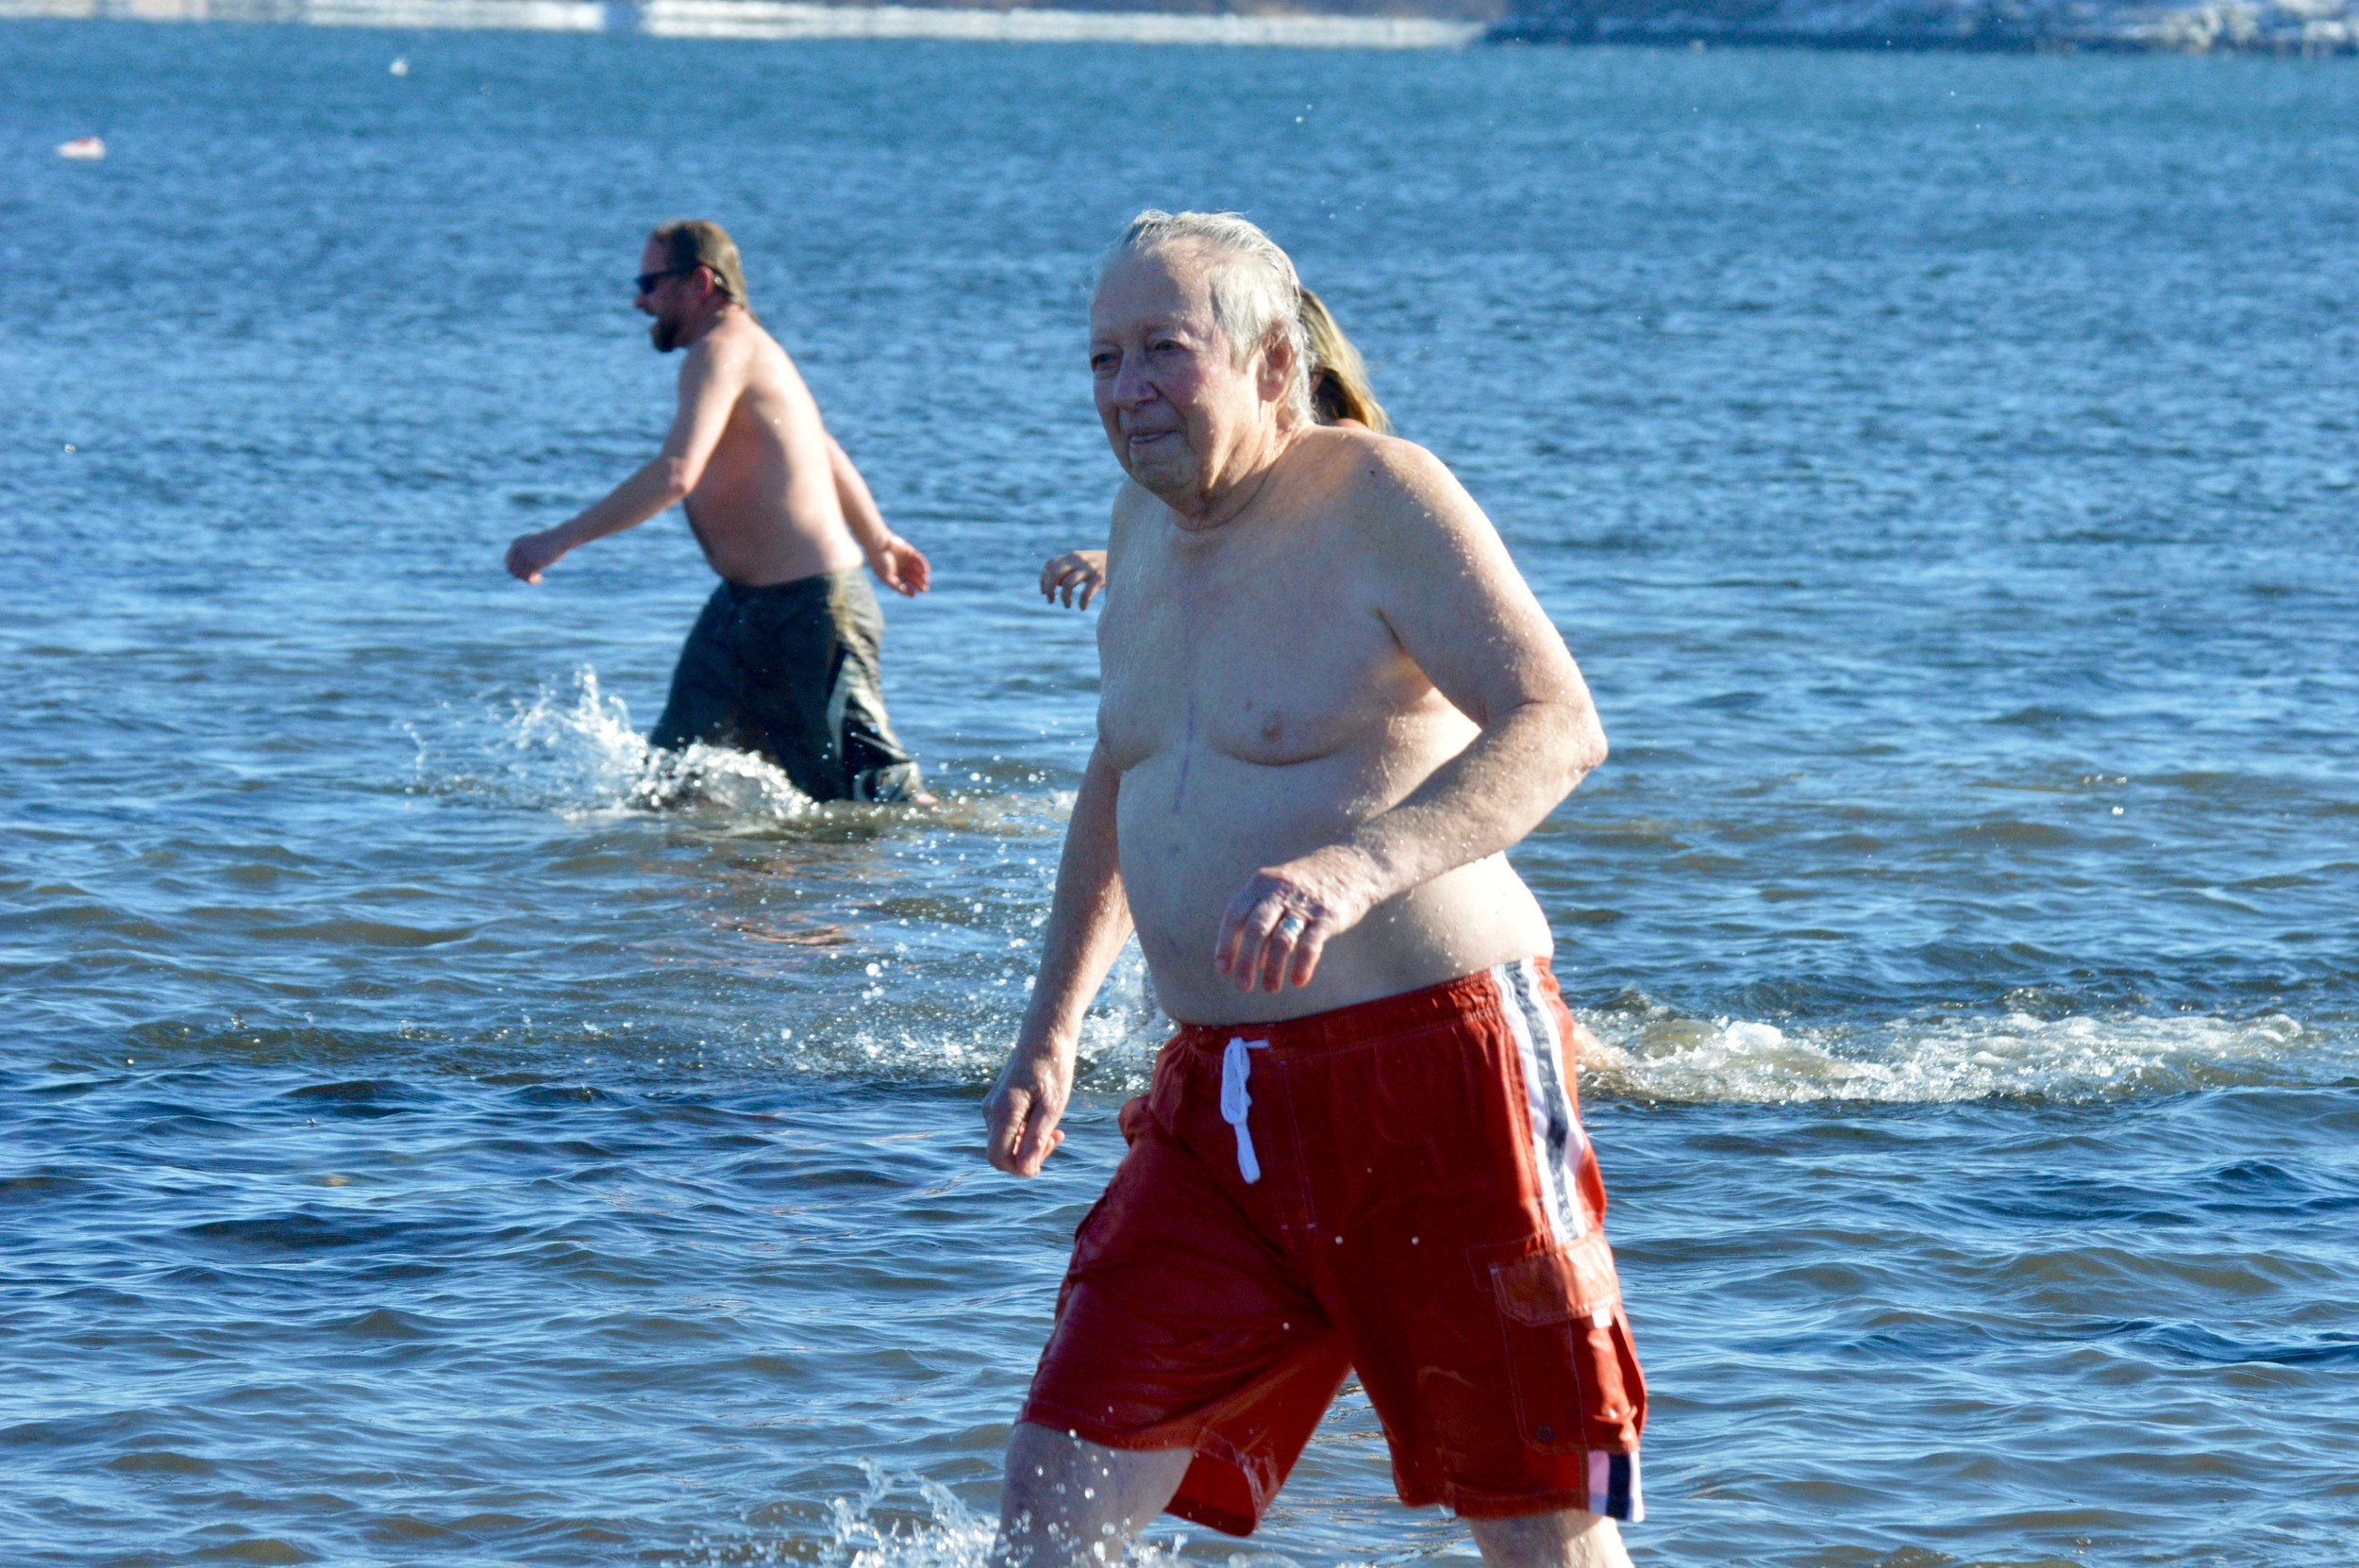 Bob Hamilton of Island Park never misses a chance to take the annual New Year’s Day plunge, no matter how cold it is.